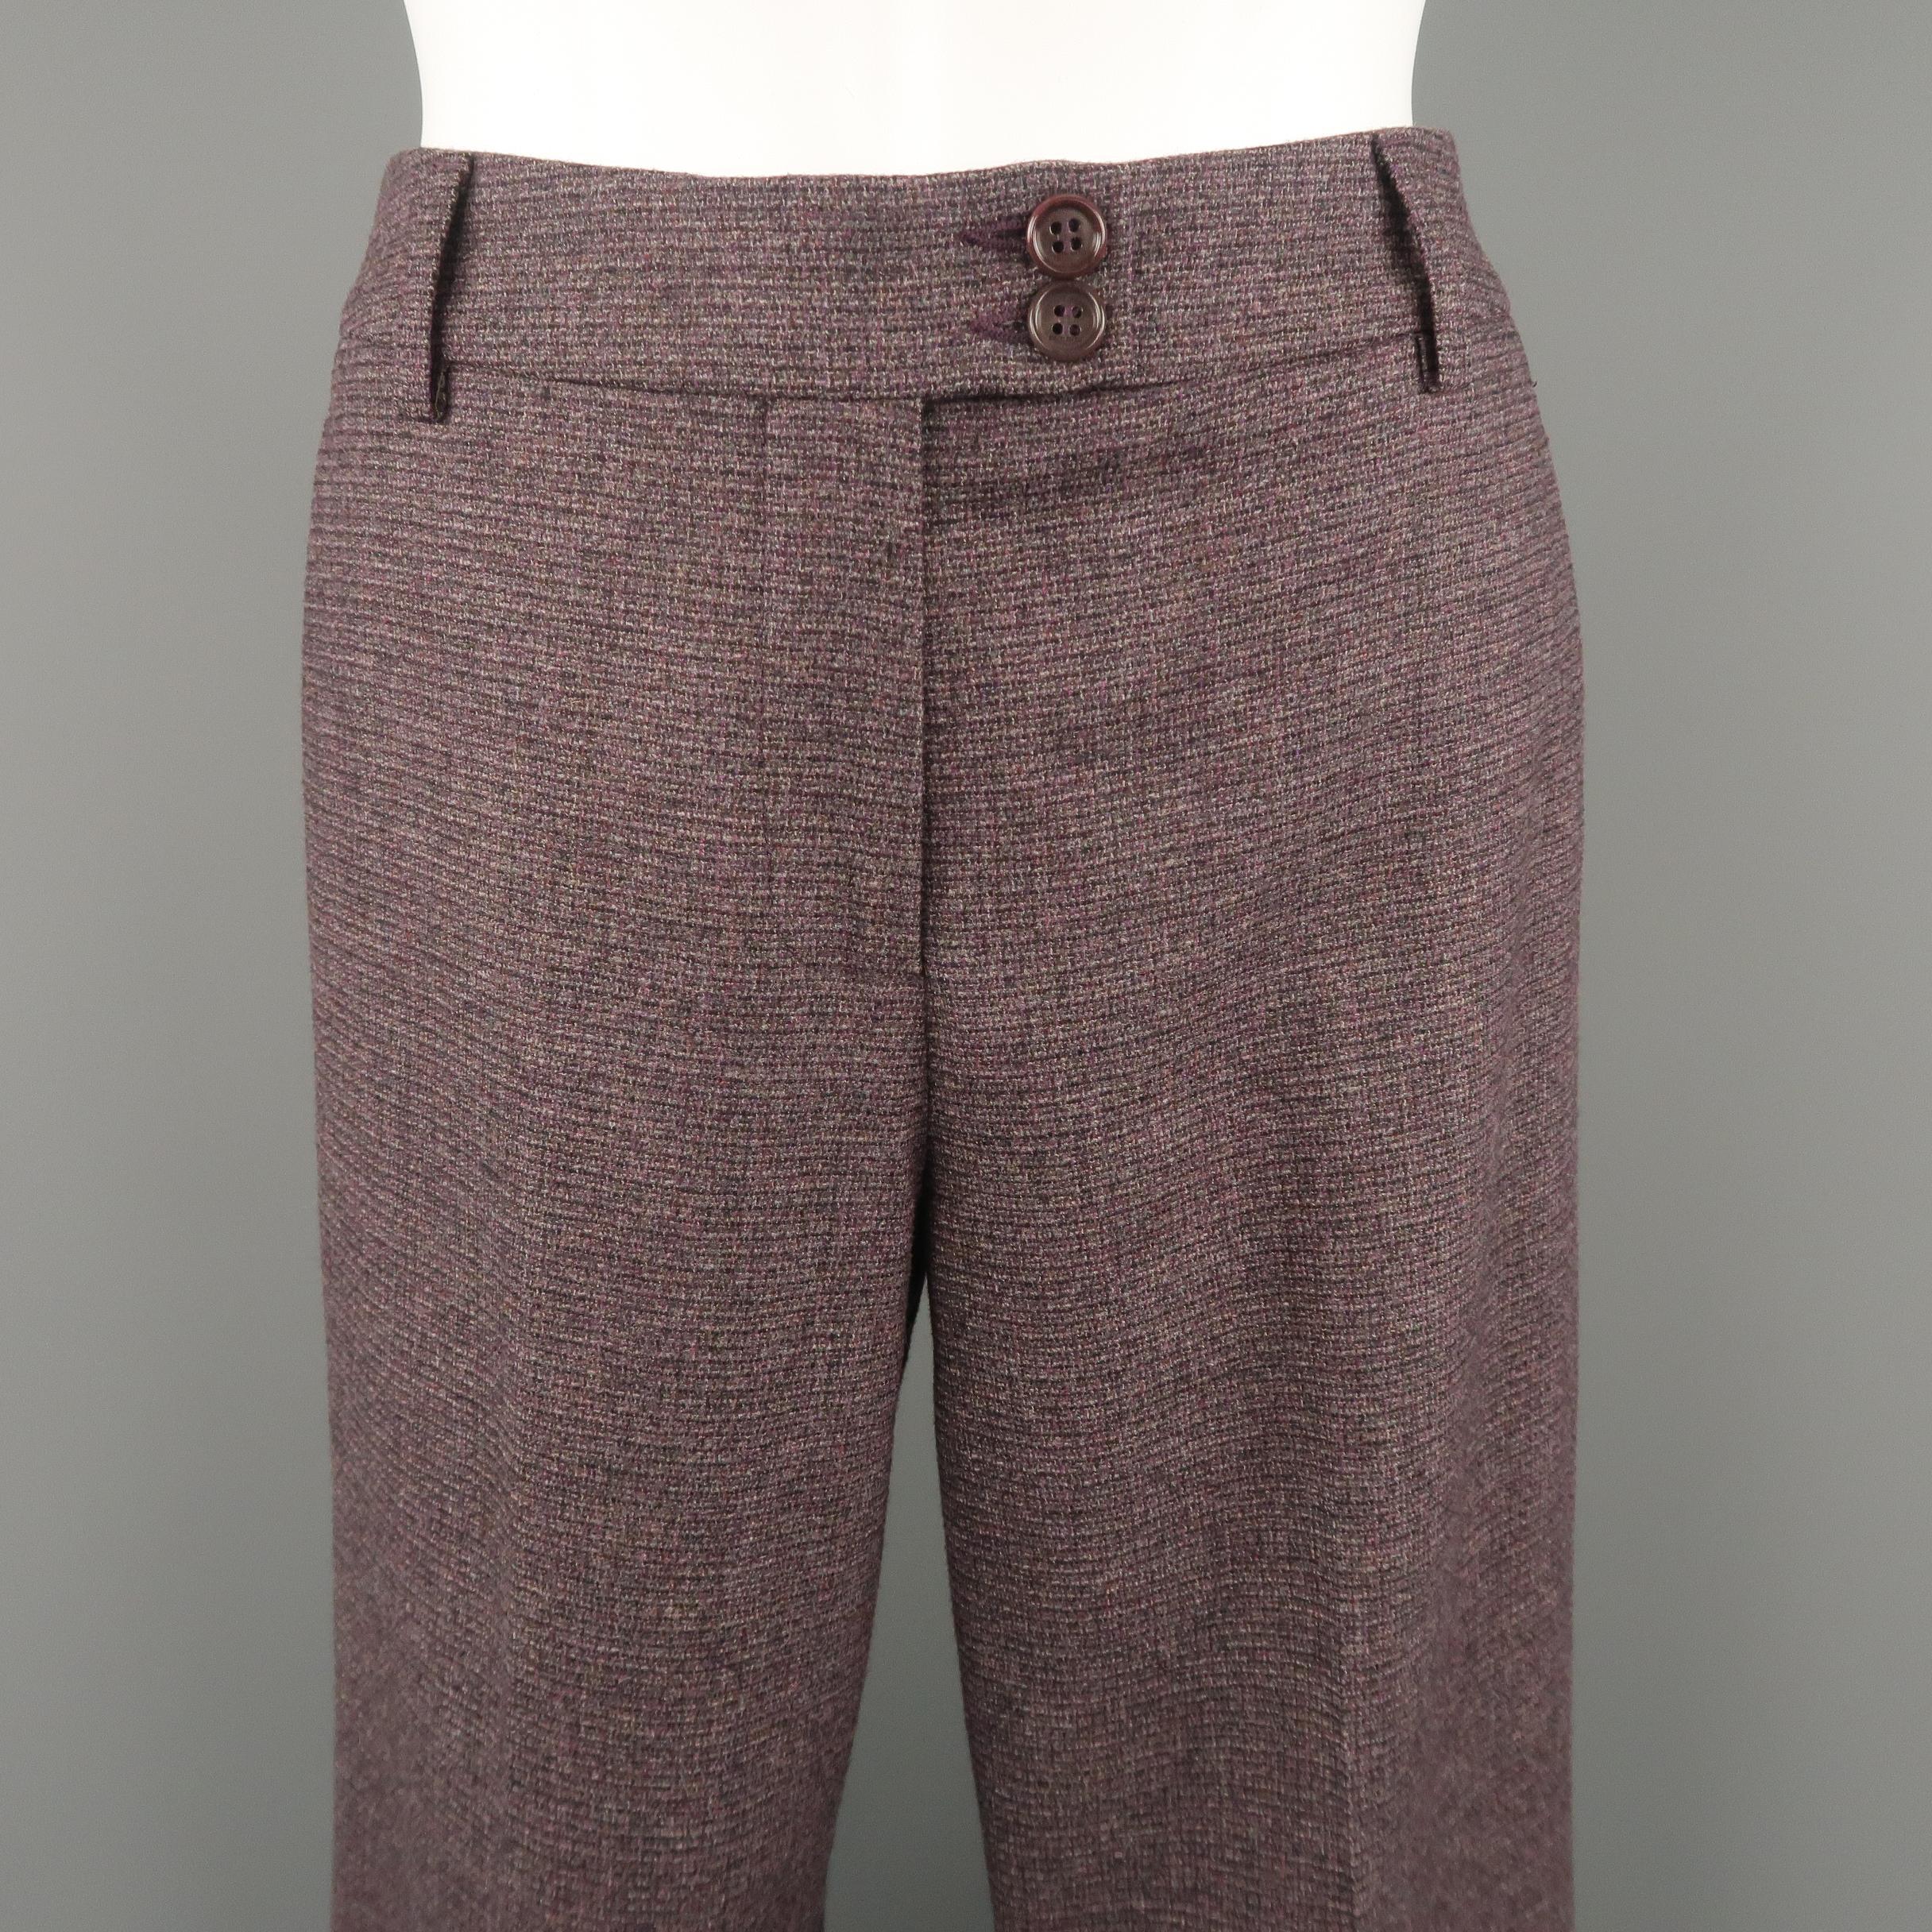 ETRO dress pants come in purple stretch wool tweed with a tab button waistband and flat front straight leg. Made in Italy.
 
Excellent Pre-Owned Condition.
Marked: IT 38
 
Measurements:
 
Waist: 30 in.
Rise: 10 in.
Inseam: 32 in.
